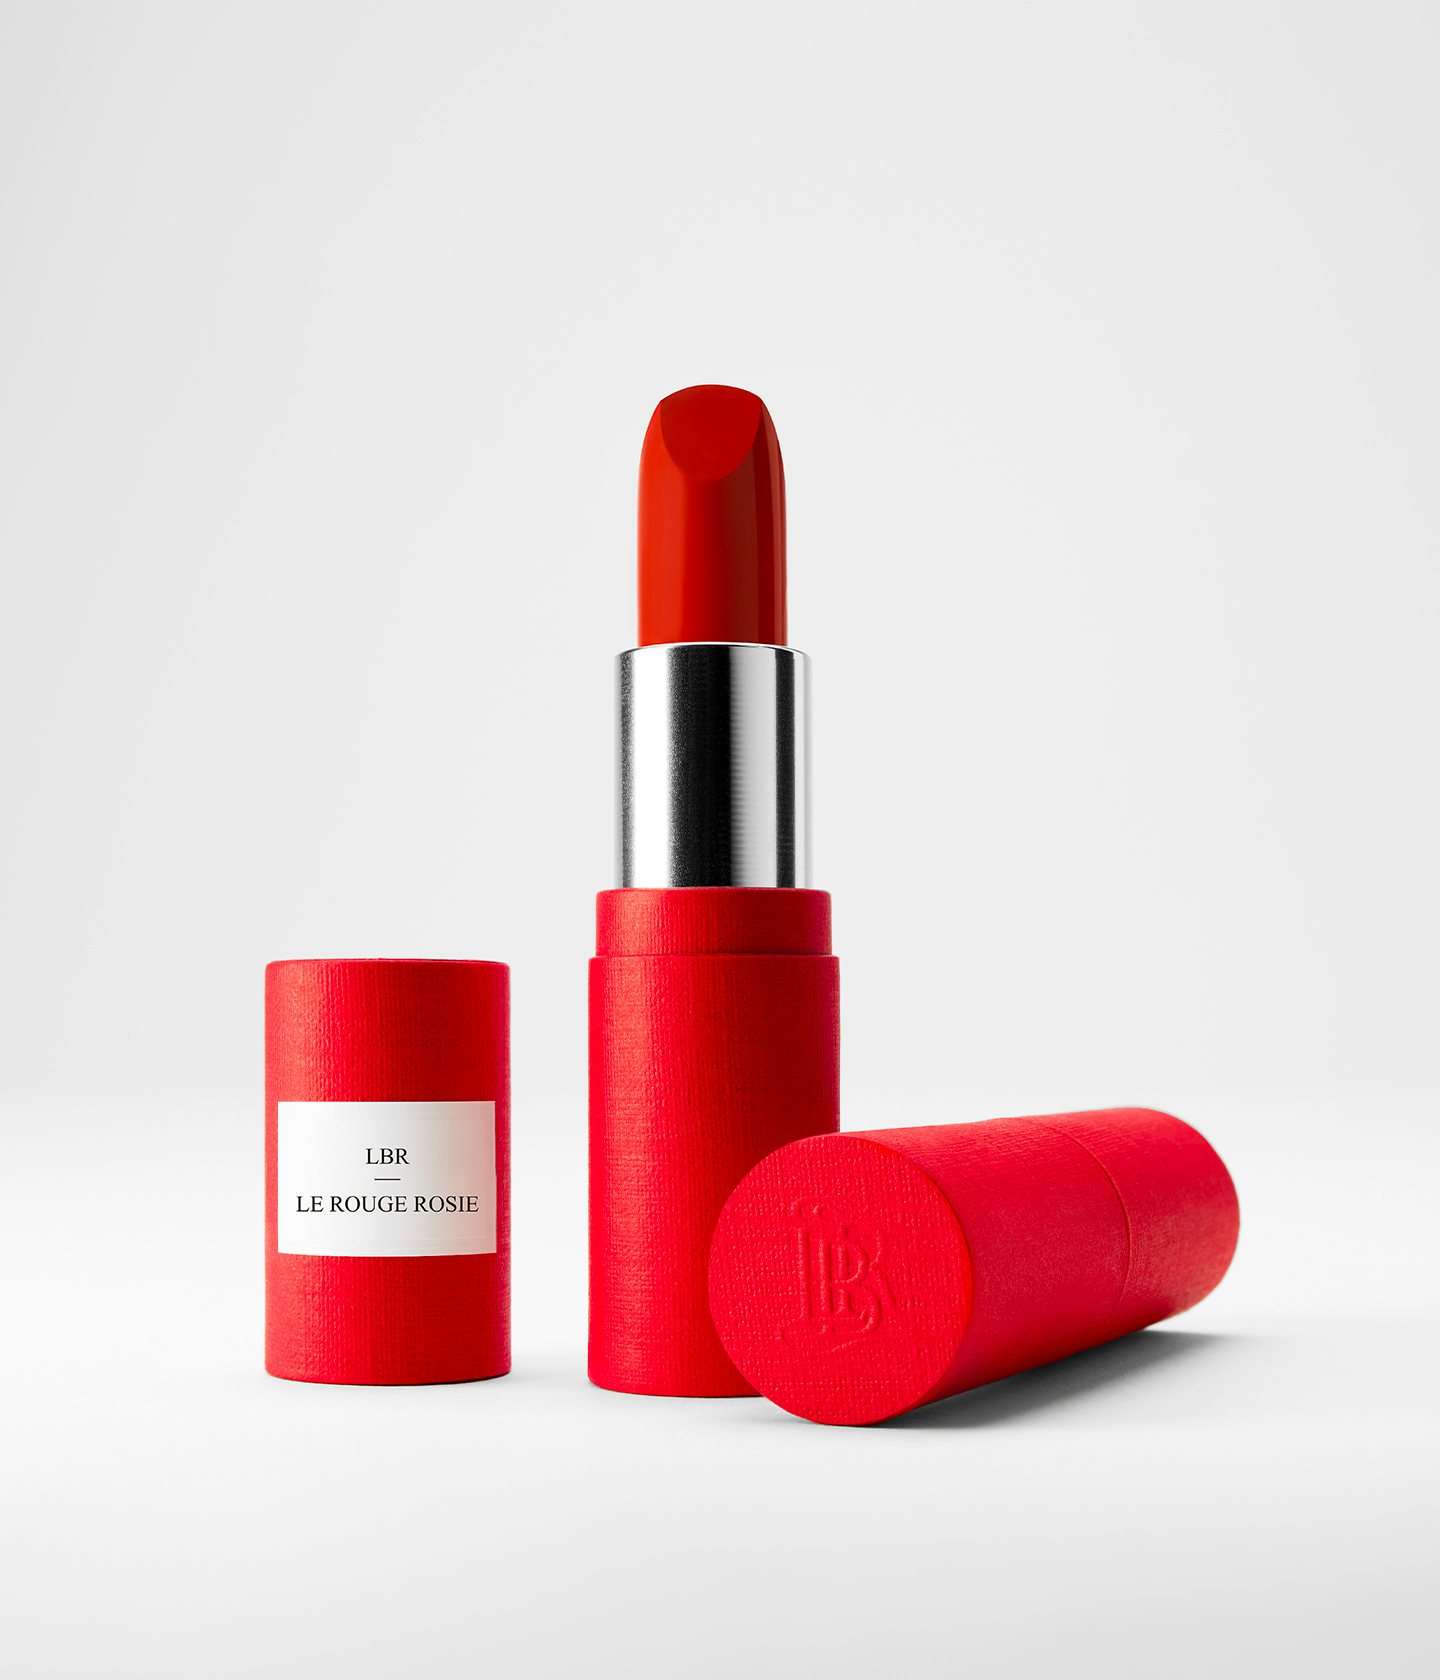 La bouche rouge Le Rouge Rosie lipstick in the red paper case